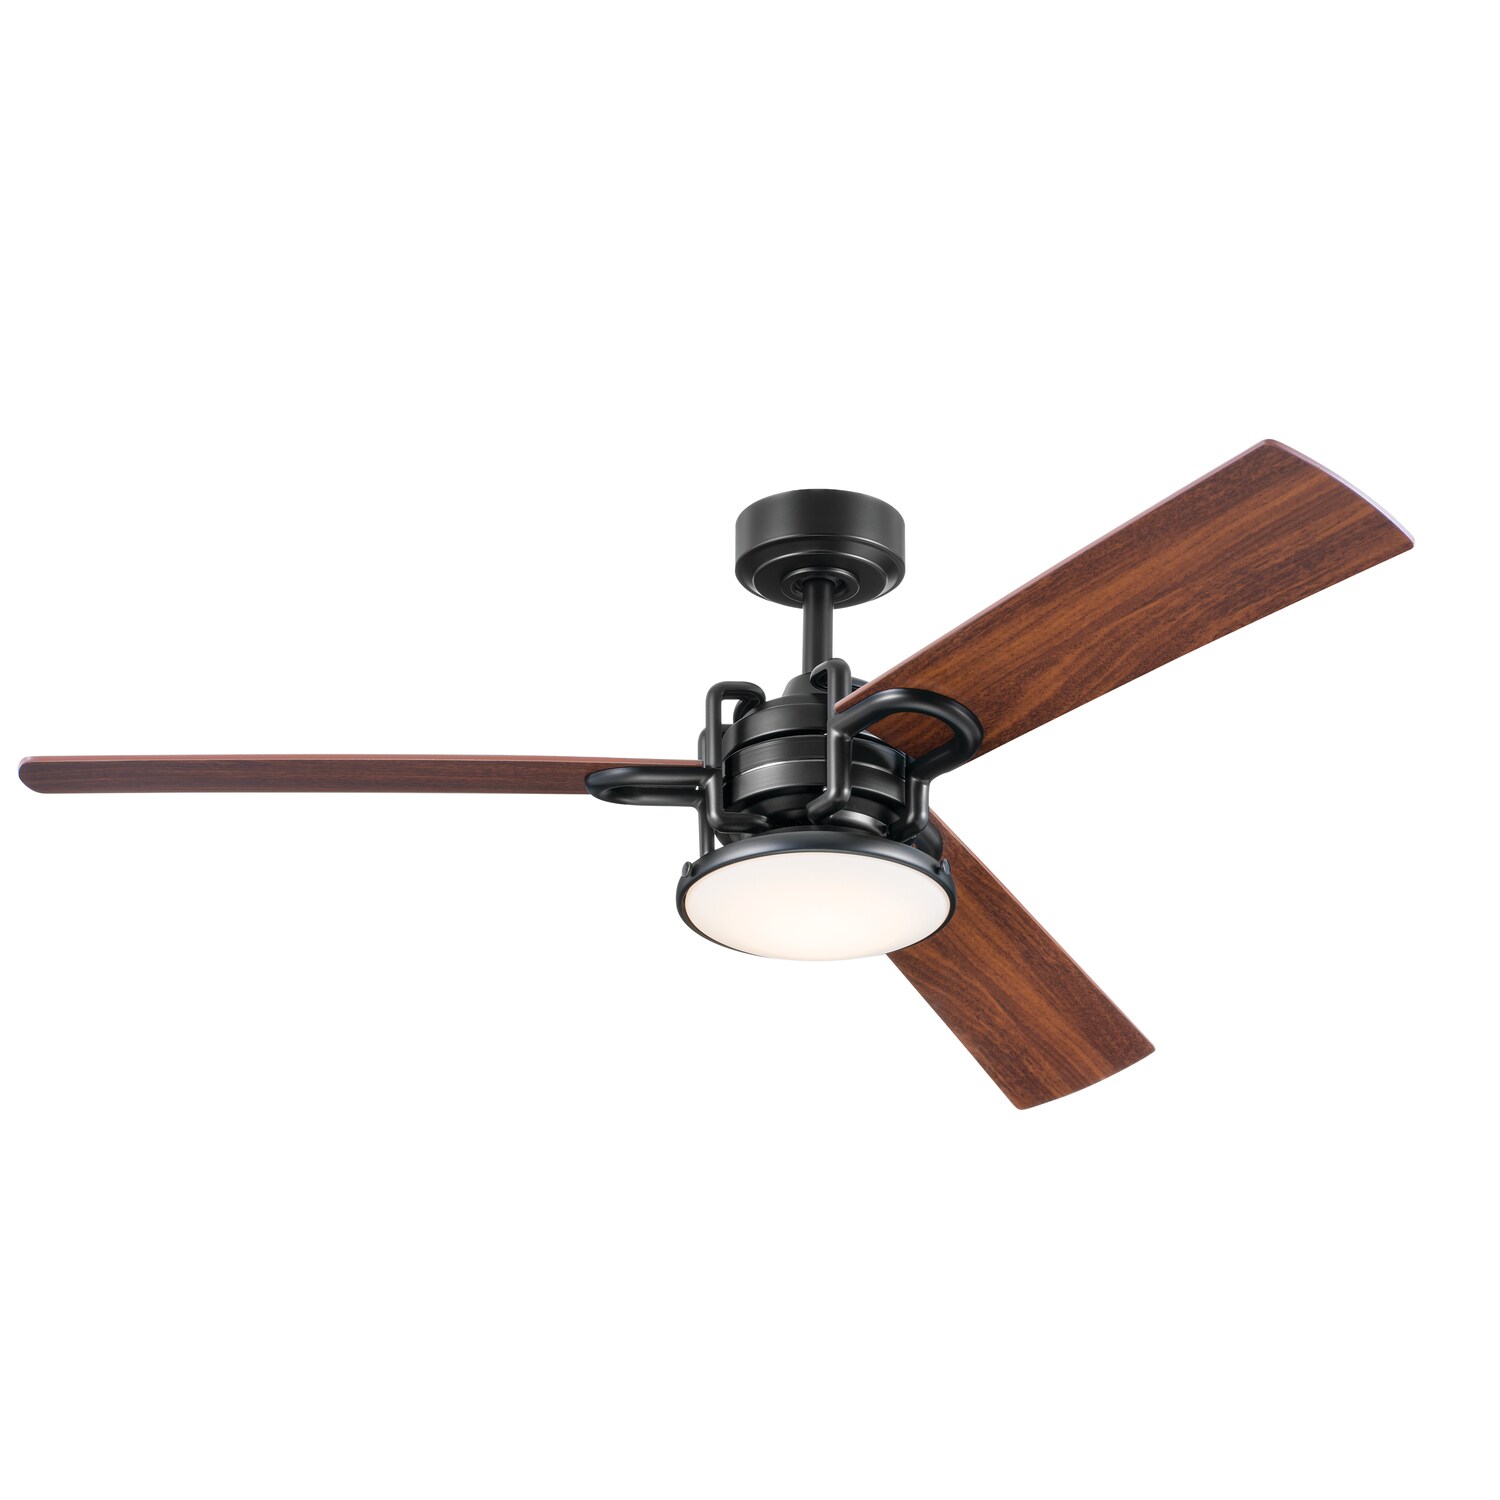 Home Decorator's Collection Mercer 52 in. LED Indoor Distressed Koa Ceiling Fan - 3